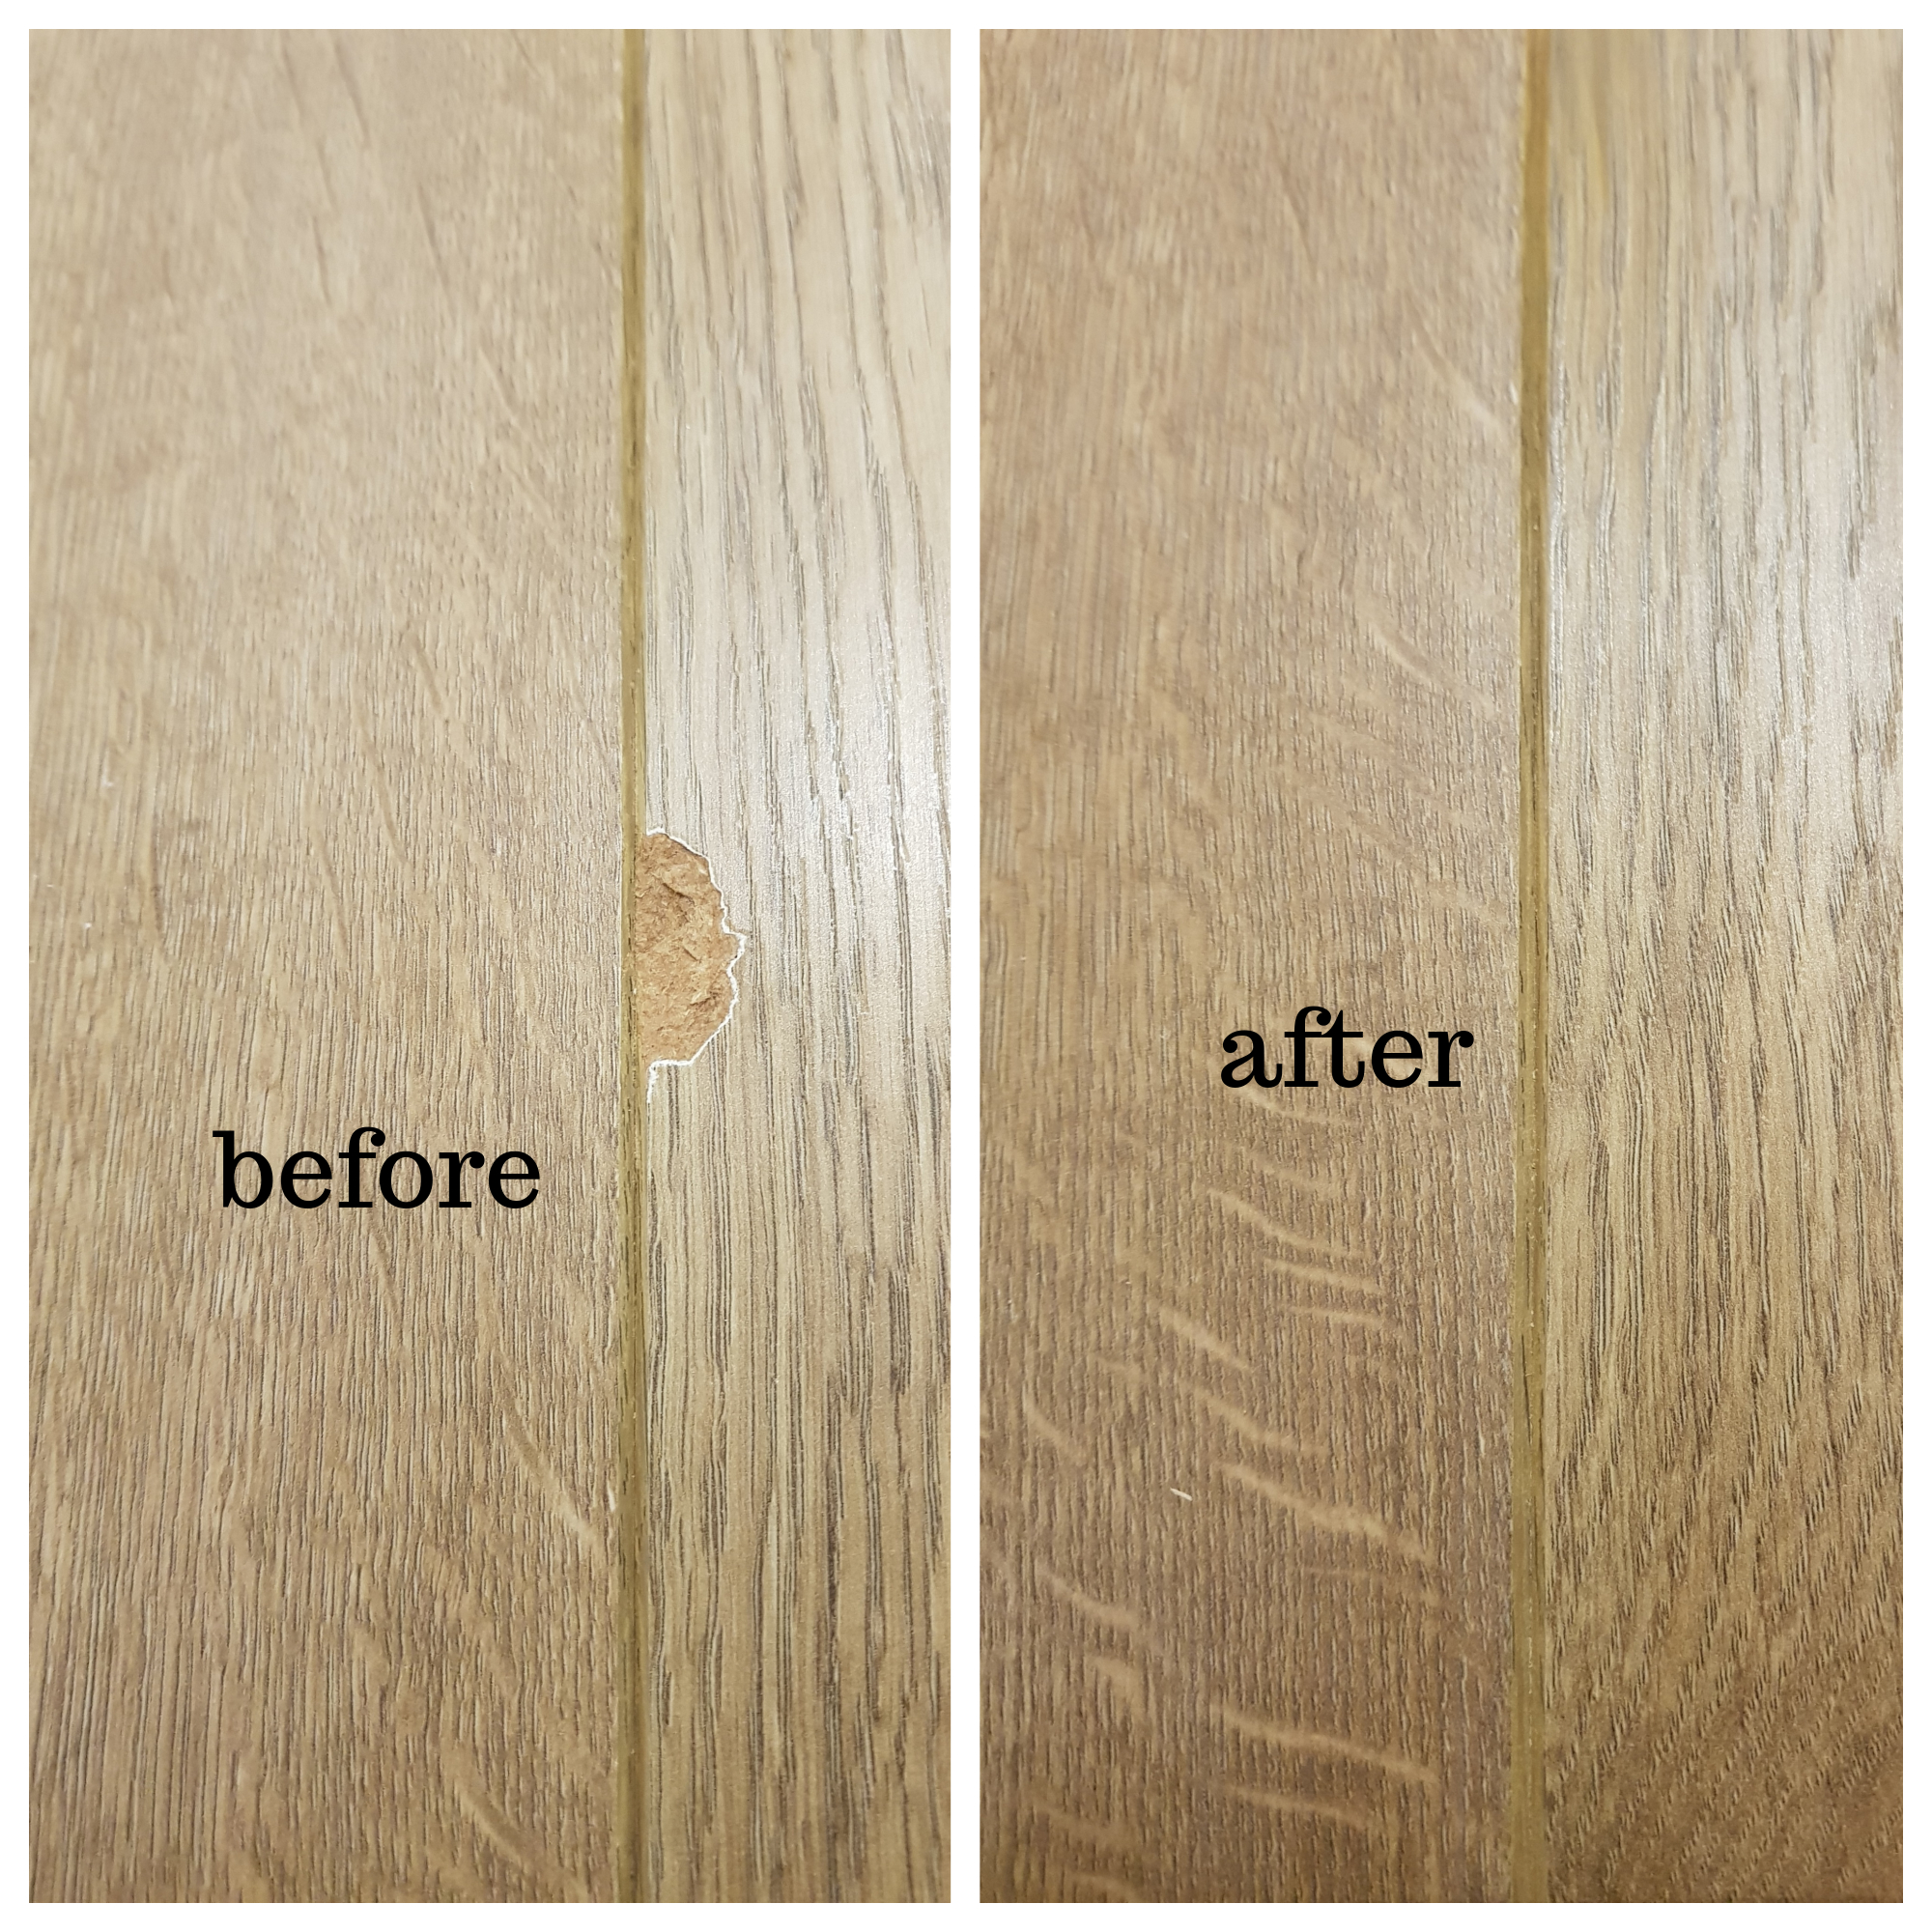 Flooring Chip Repair In London Royal, How To Cut Laminate Wood Flooring Without Chipping